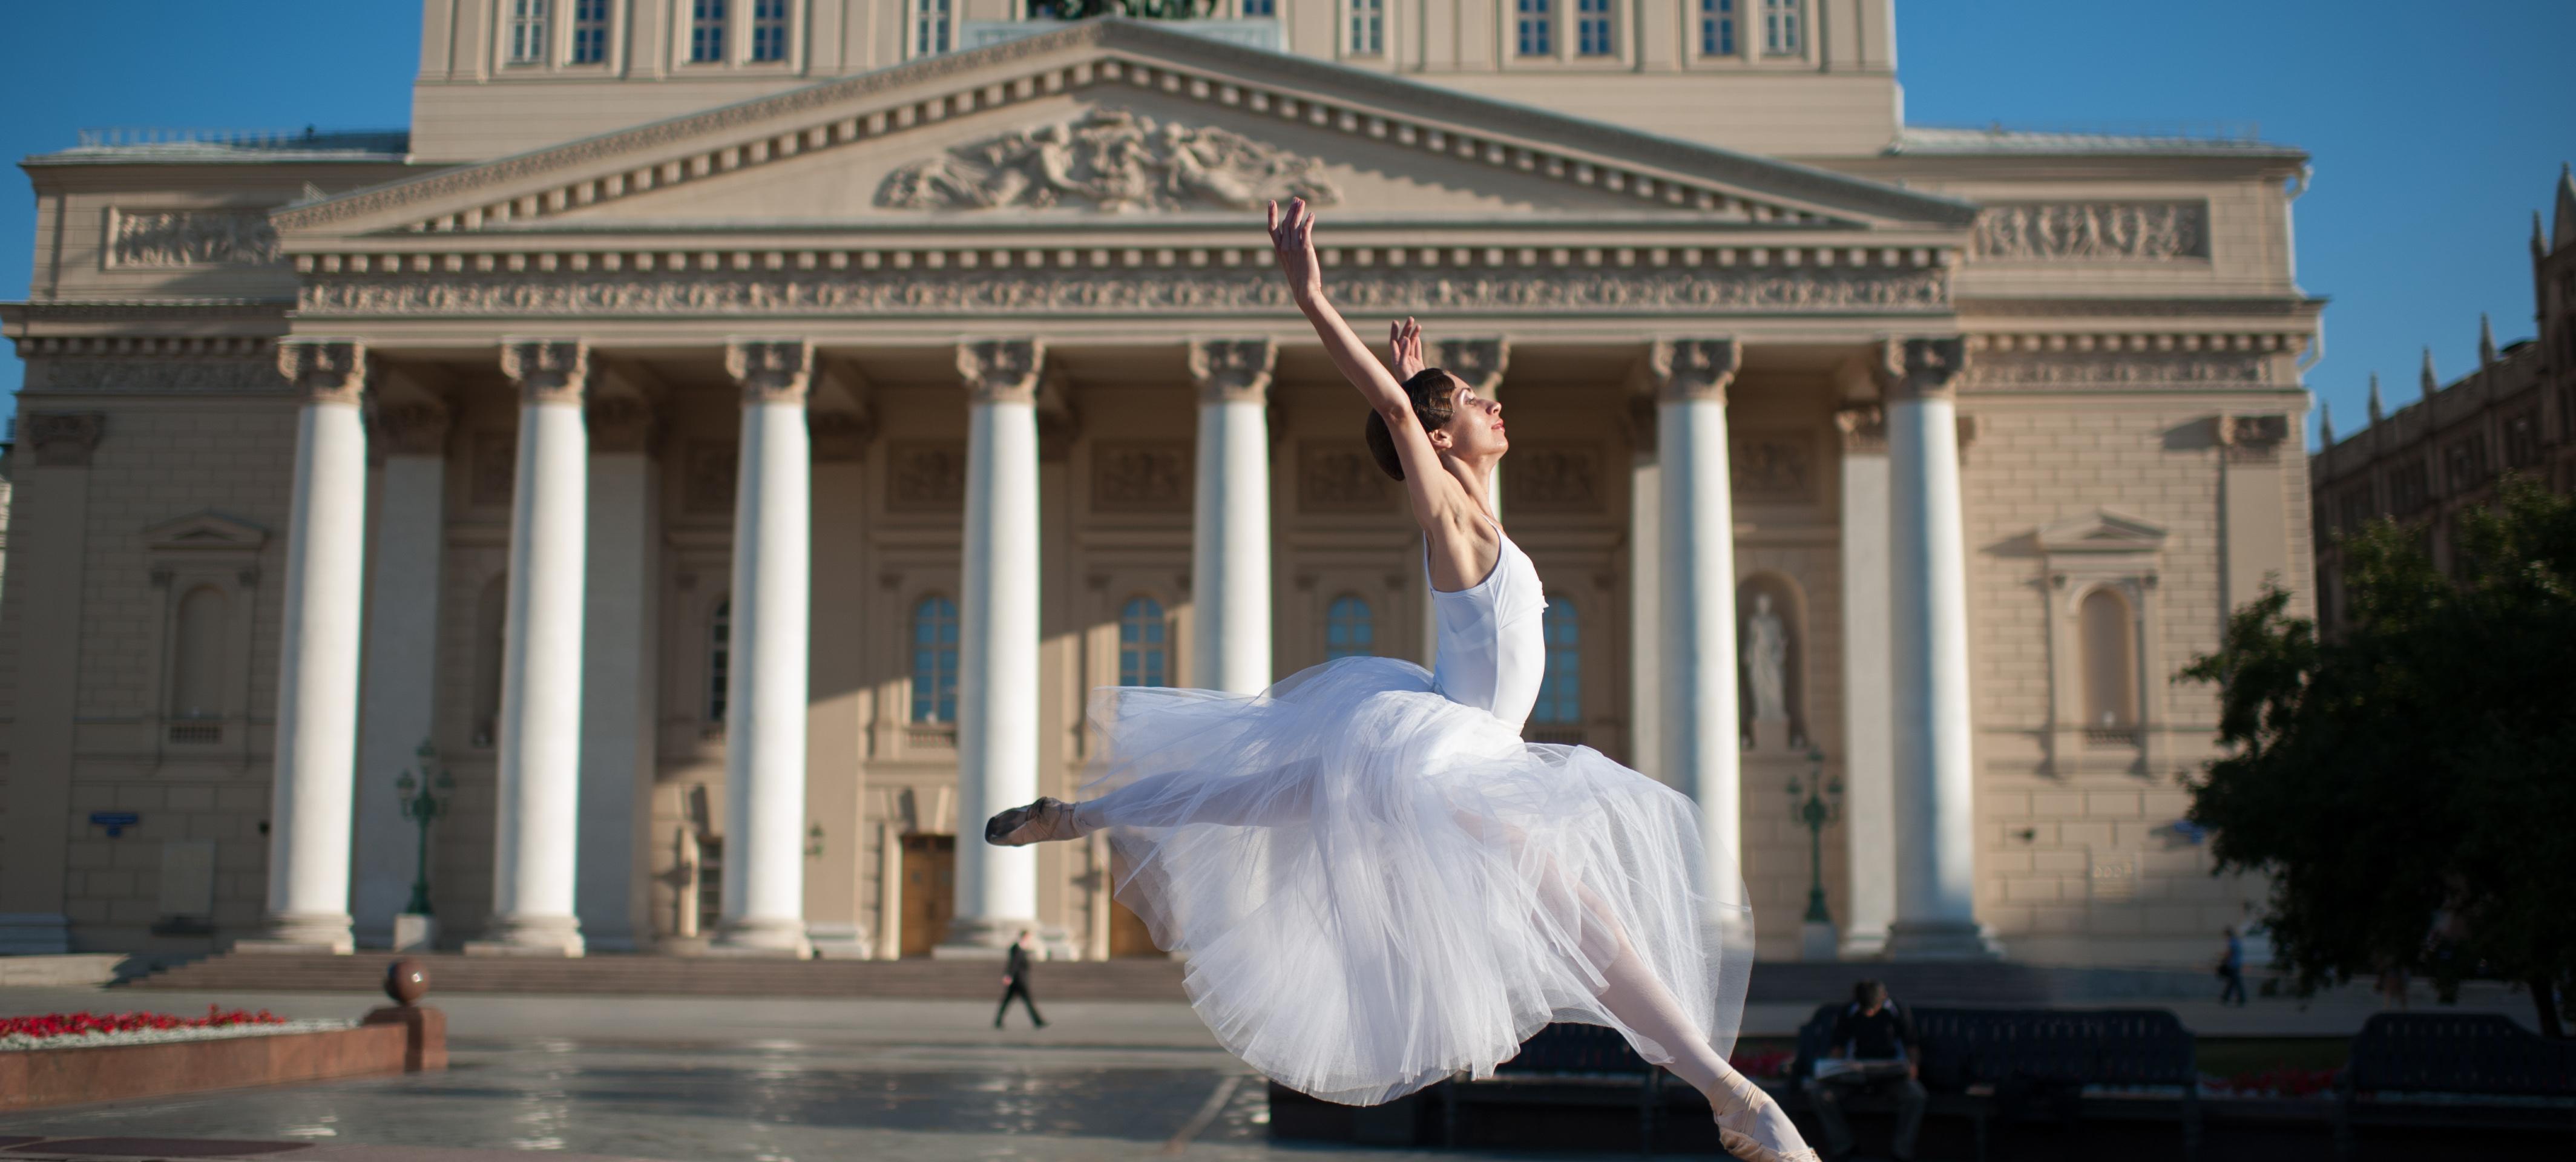 Guided Tour of the Bolshoi Theatre with Backstage Access – Hotel pick-up/drop-off